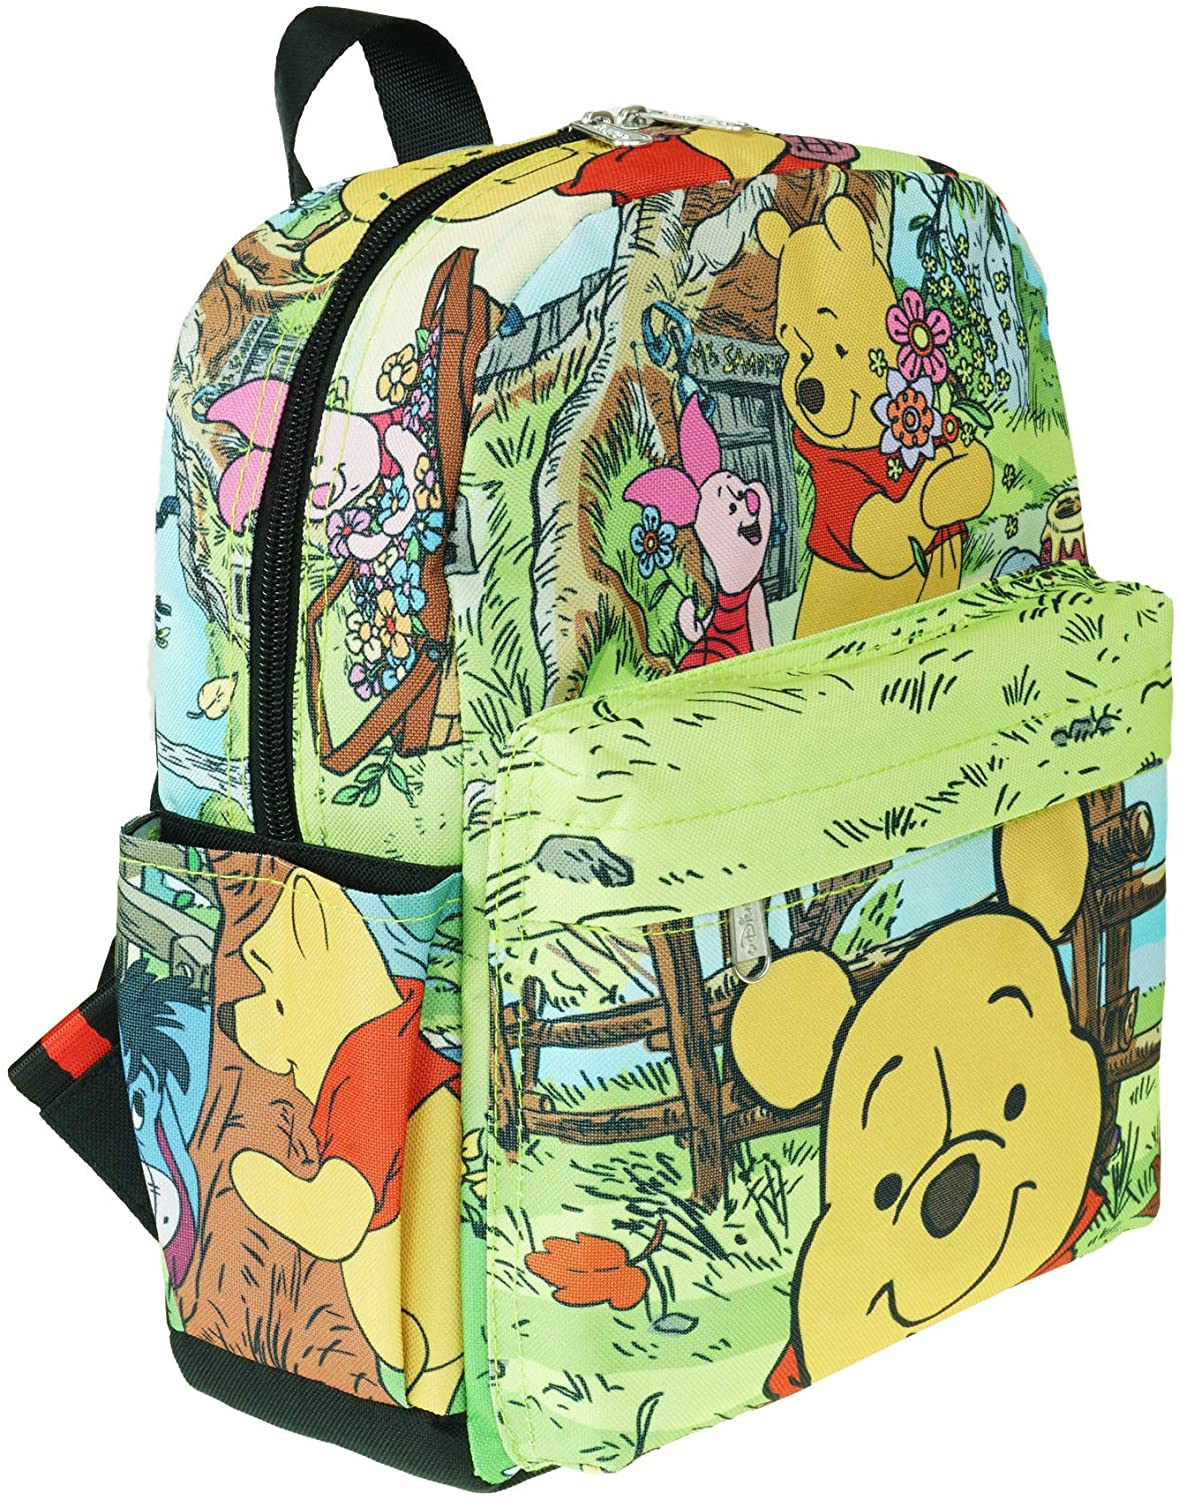 Winnie the Pooh 12" Deluxe Oversize Print Daypack - A21324 - GTE Zone